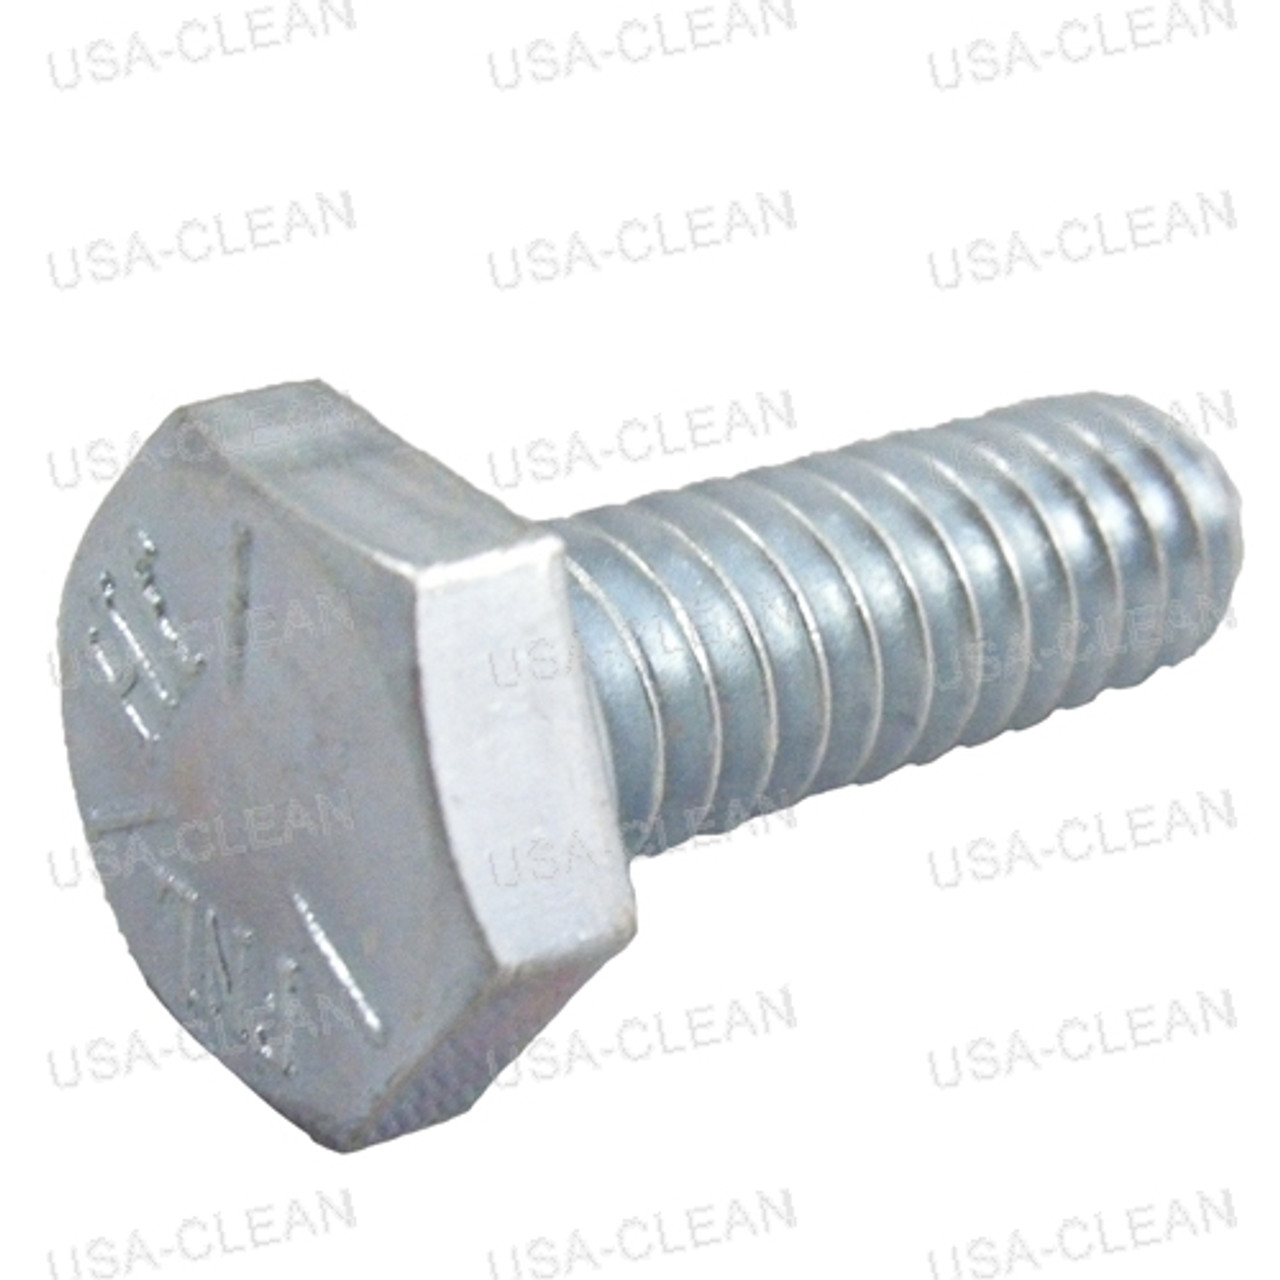 Bolt 1/4-20 x 3/4 hex head grade zinc plated 999-0020 – Ships Fast from  Our Huge Inventory USA-CLEAN